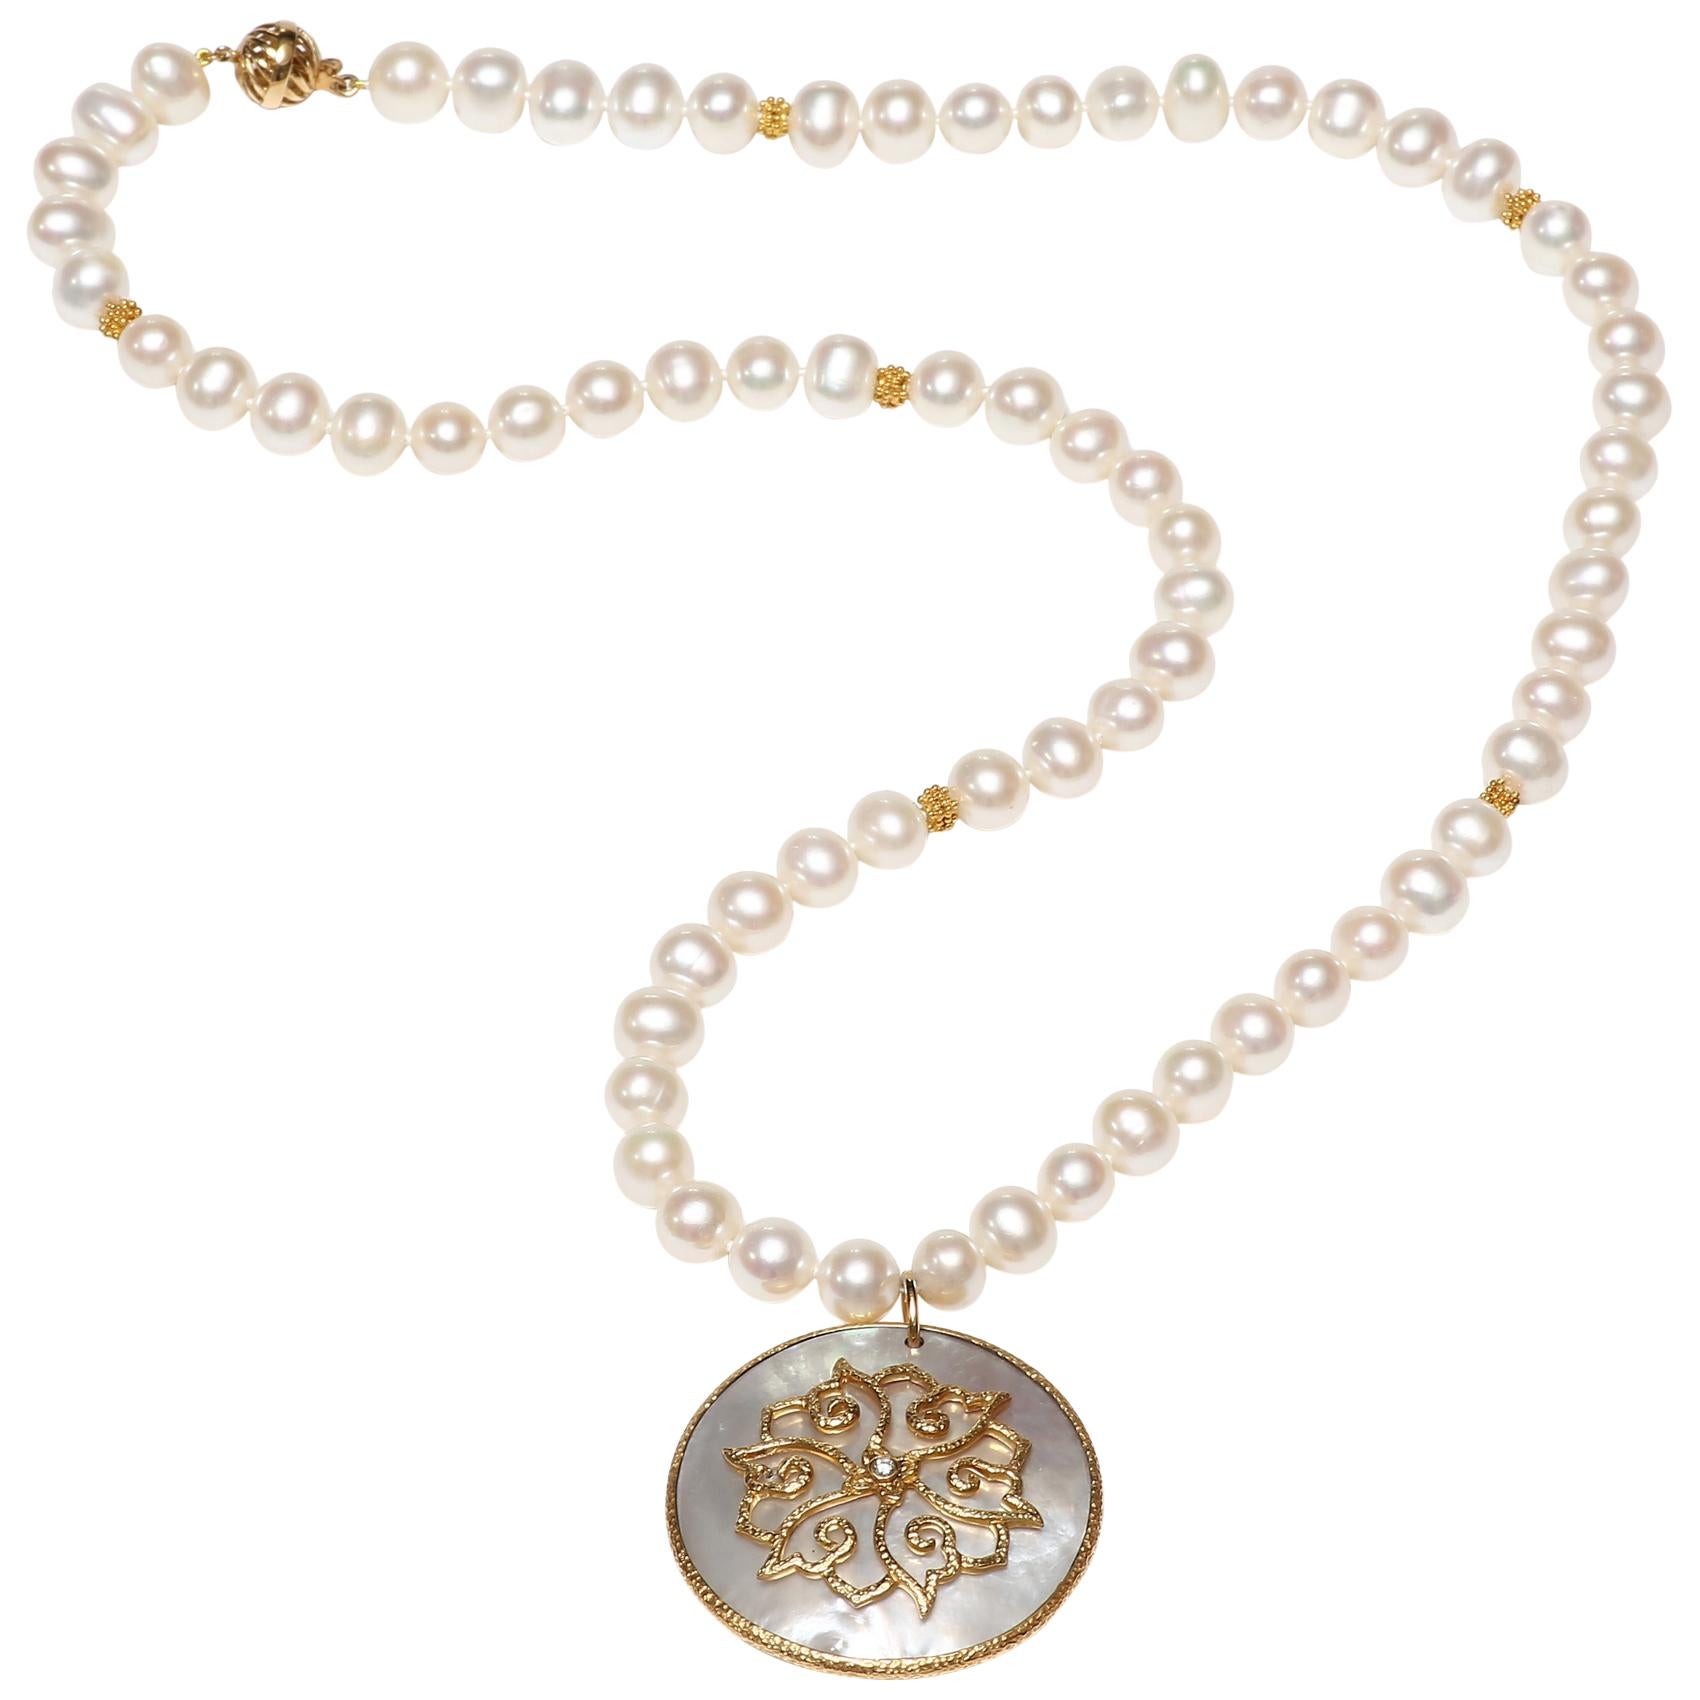 Freshwater Pearl Necklace with Lotus motif of Gold on Mother of Pearl Pedant